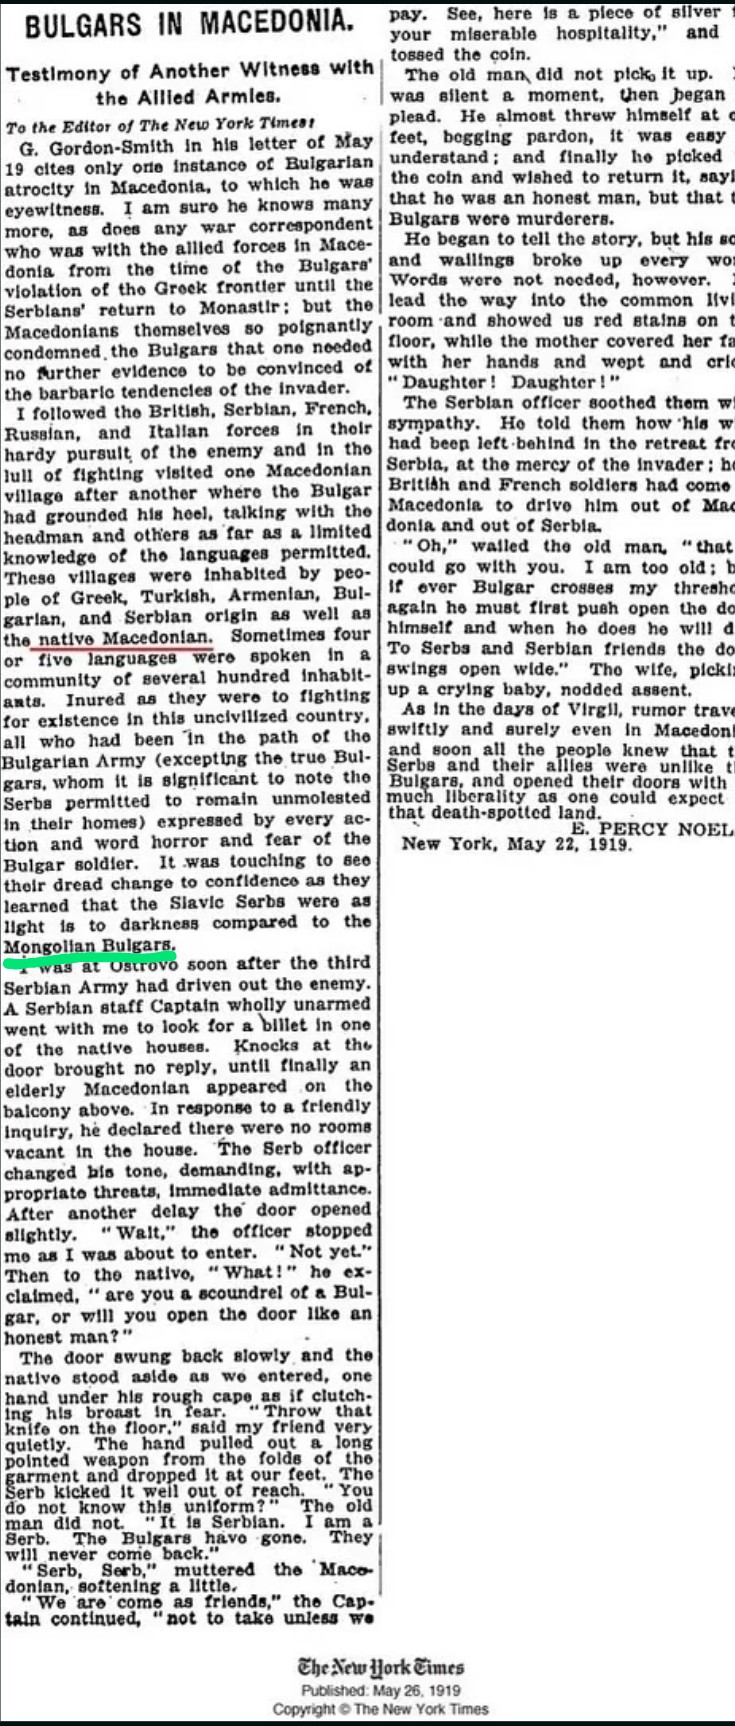 1919.05.26_The New York Times, E. Percy Noel